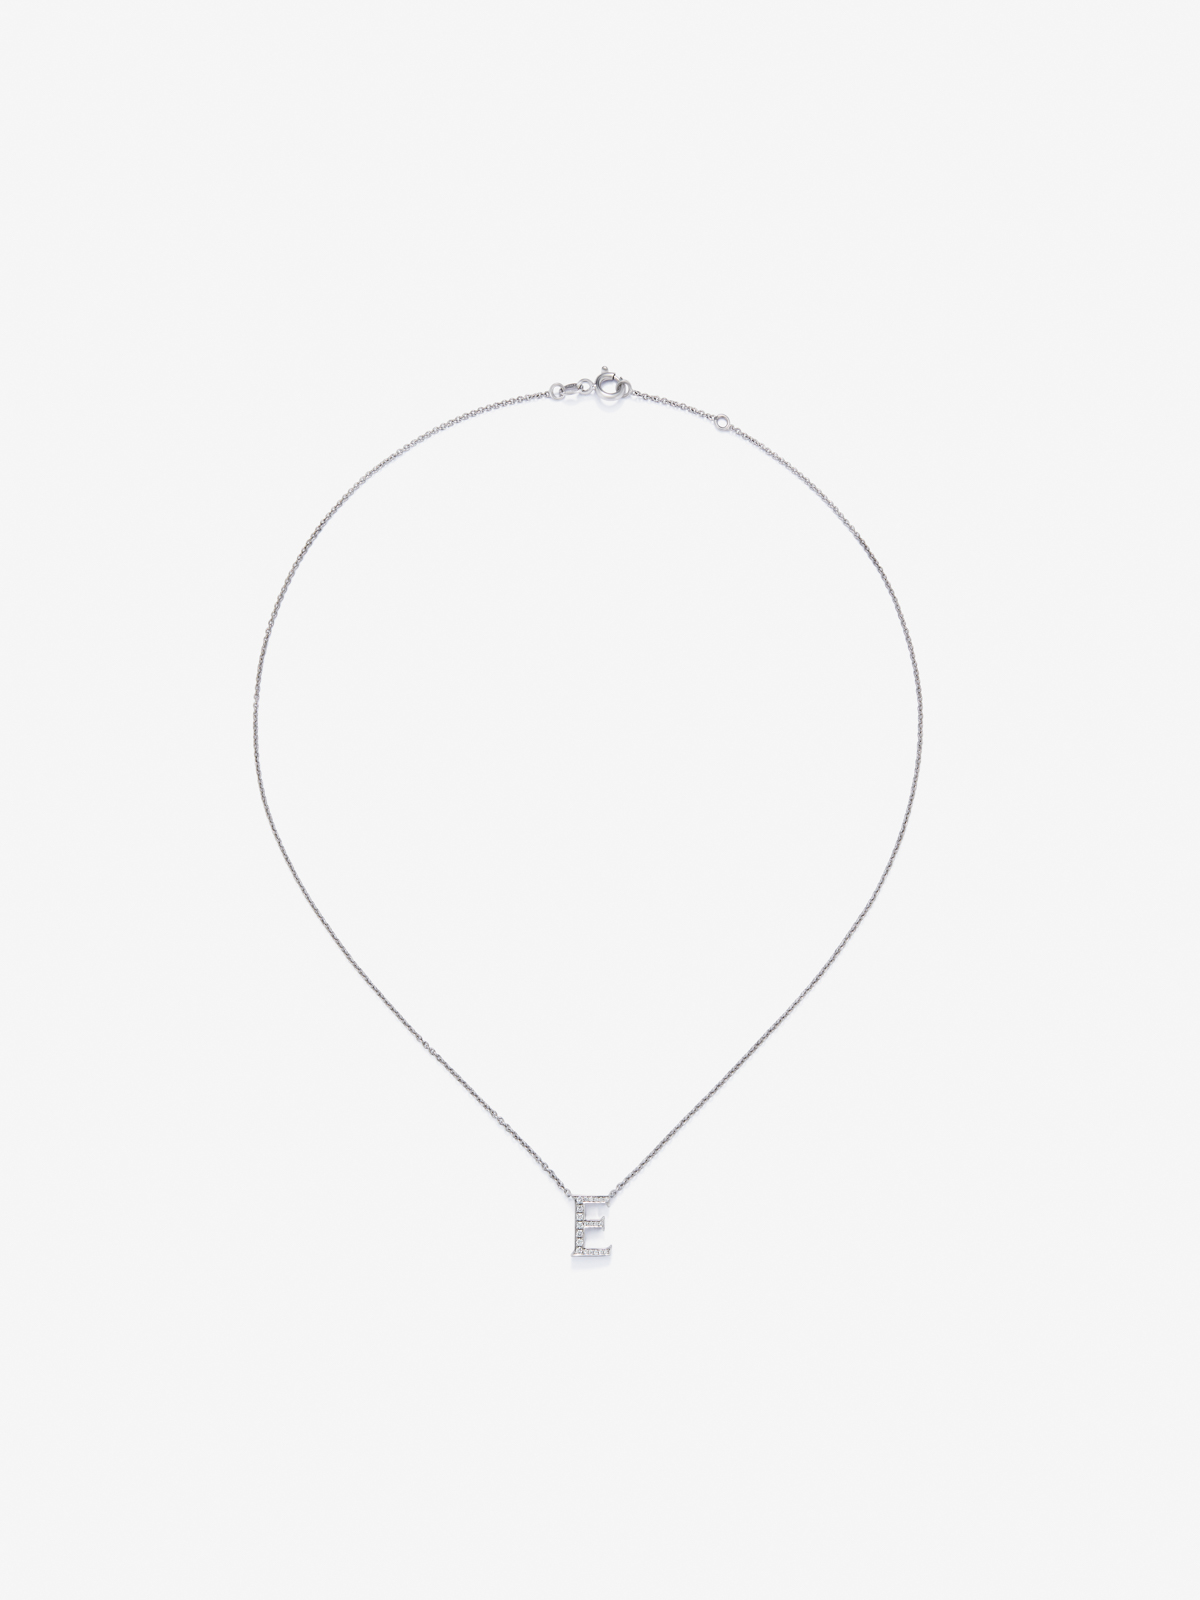 18K White Gold Pendant Chain with Initial and Diamonds